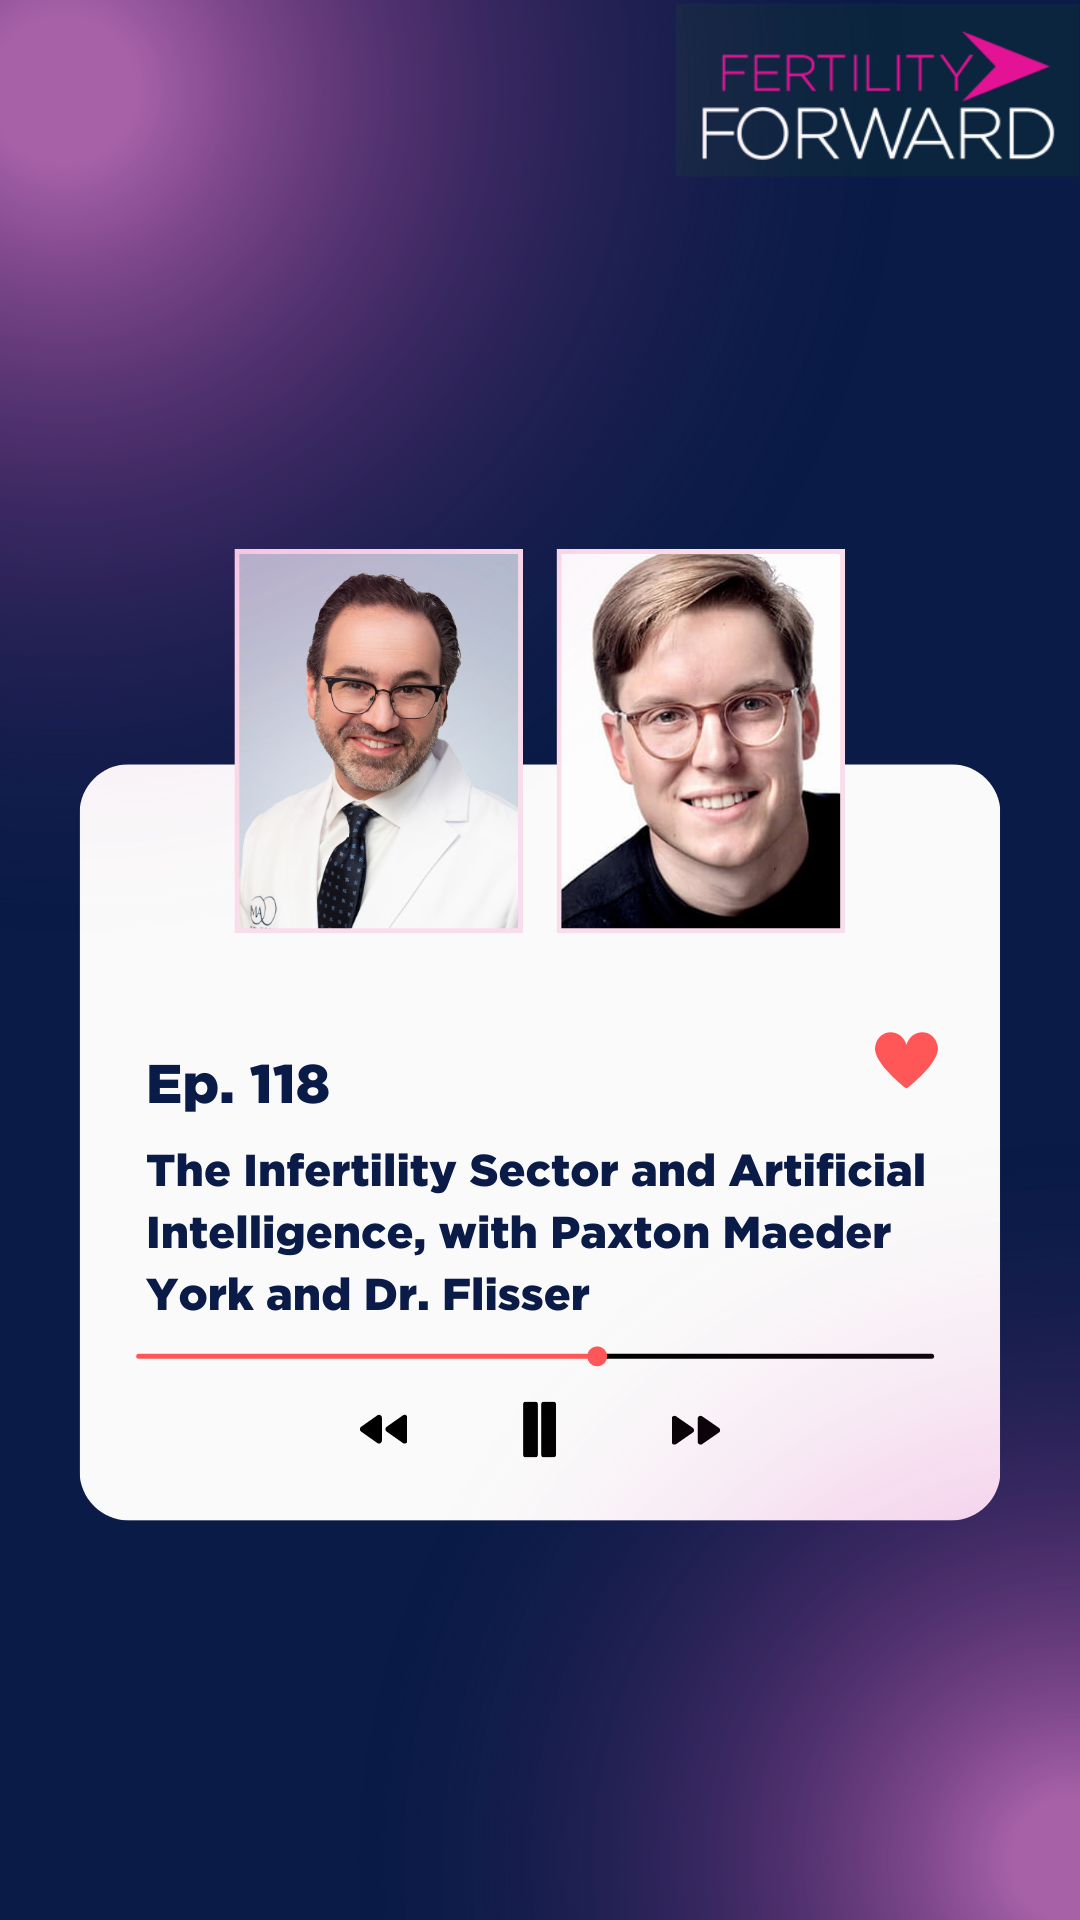 Ep 118: The Infertility Sector and Artificial Intelligence, with Paxton Maeder York and Dr. Flisser